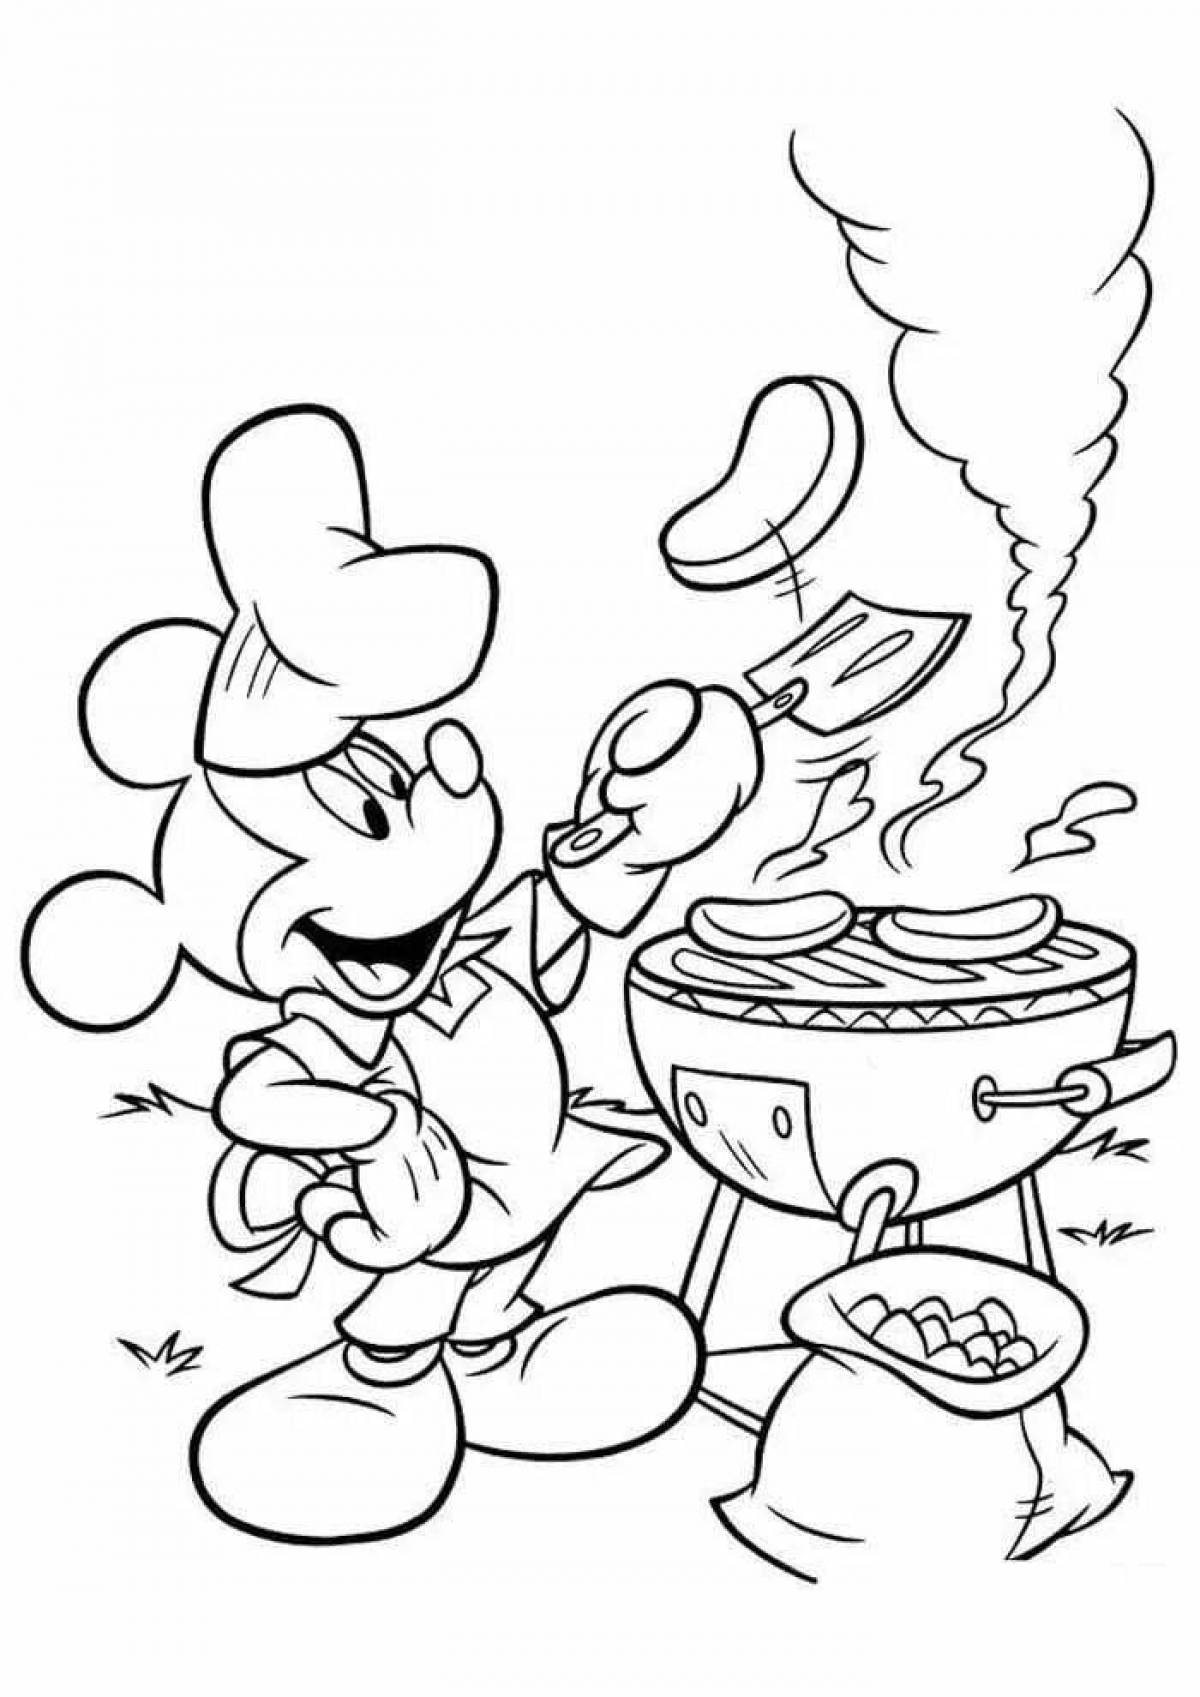 Cook coloring page in bright colors